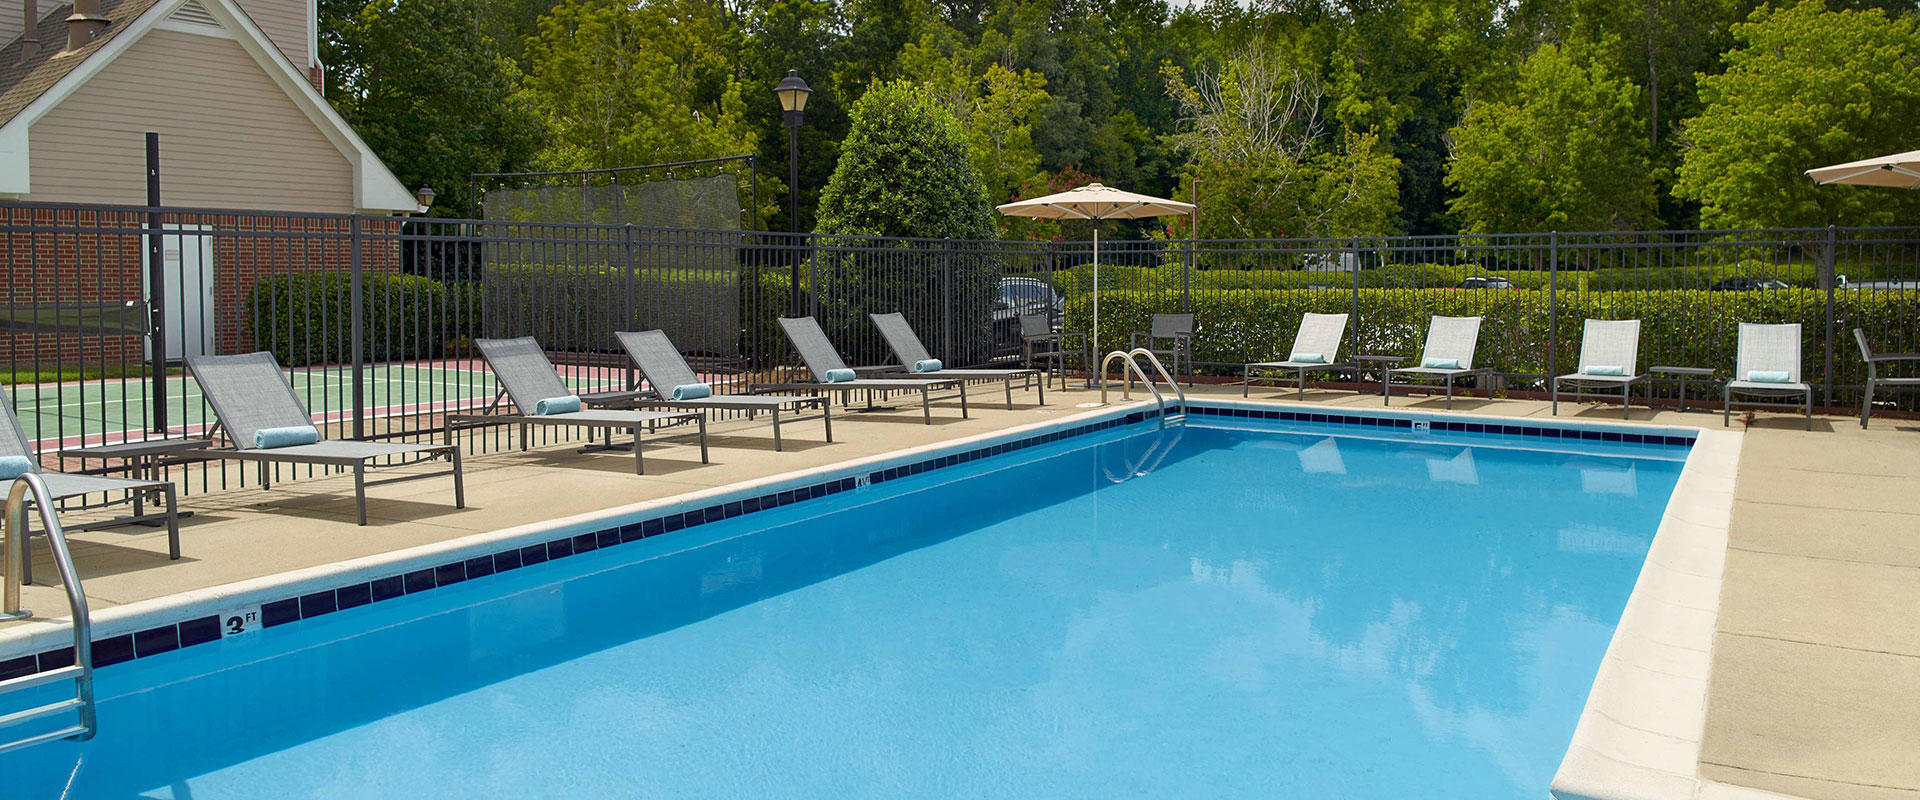 Raleigh Cary Hotel Pool